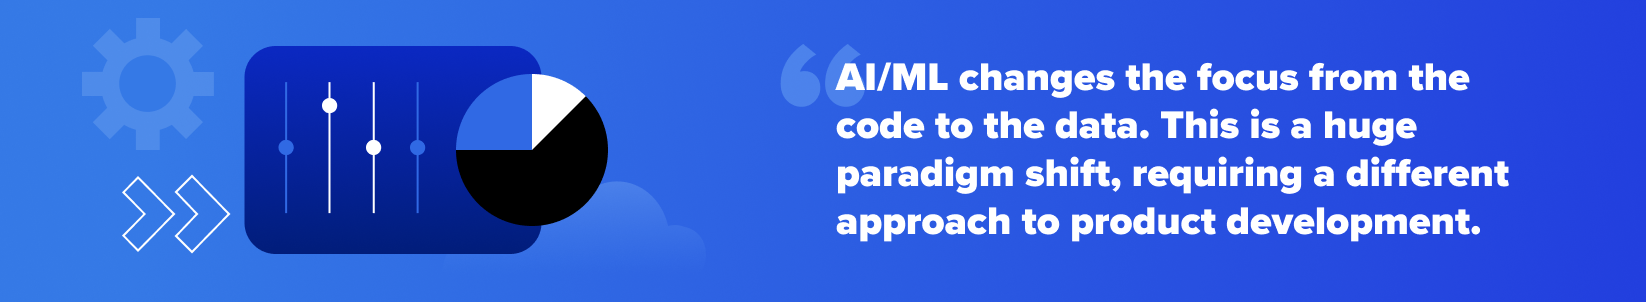 AI/ML changes the focus from the code to the data